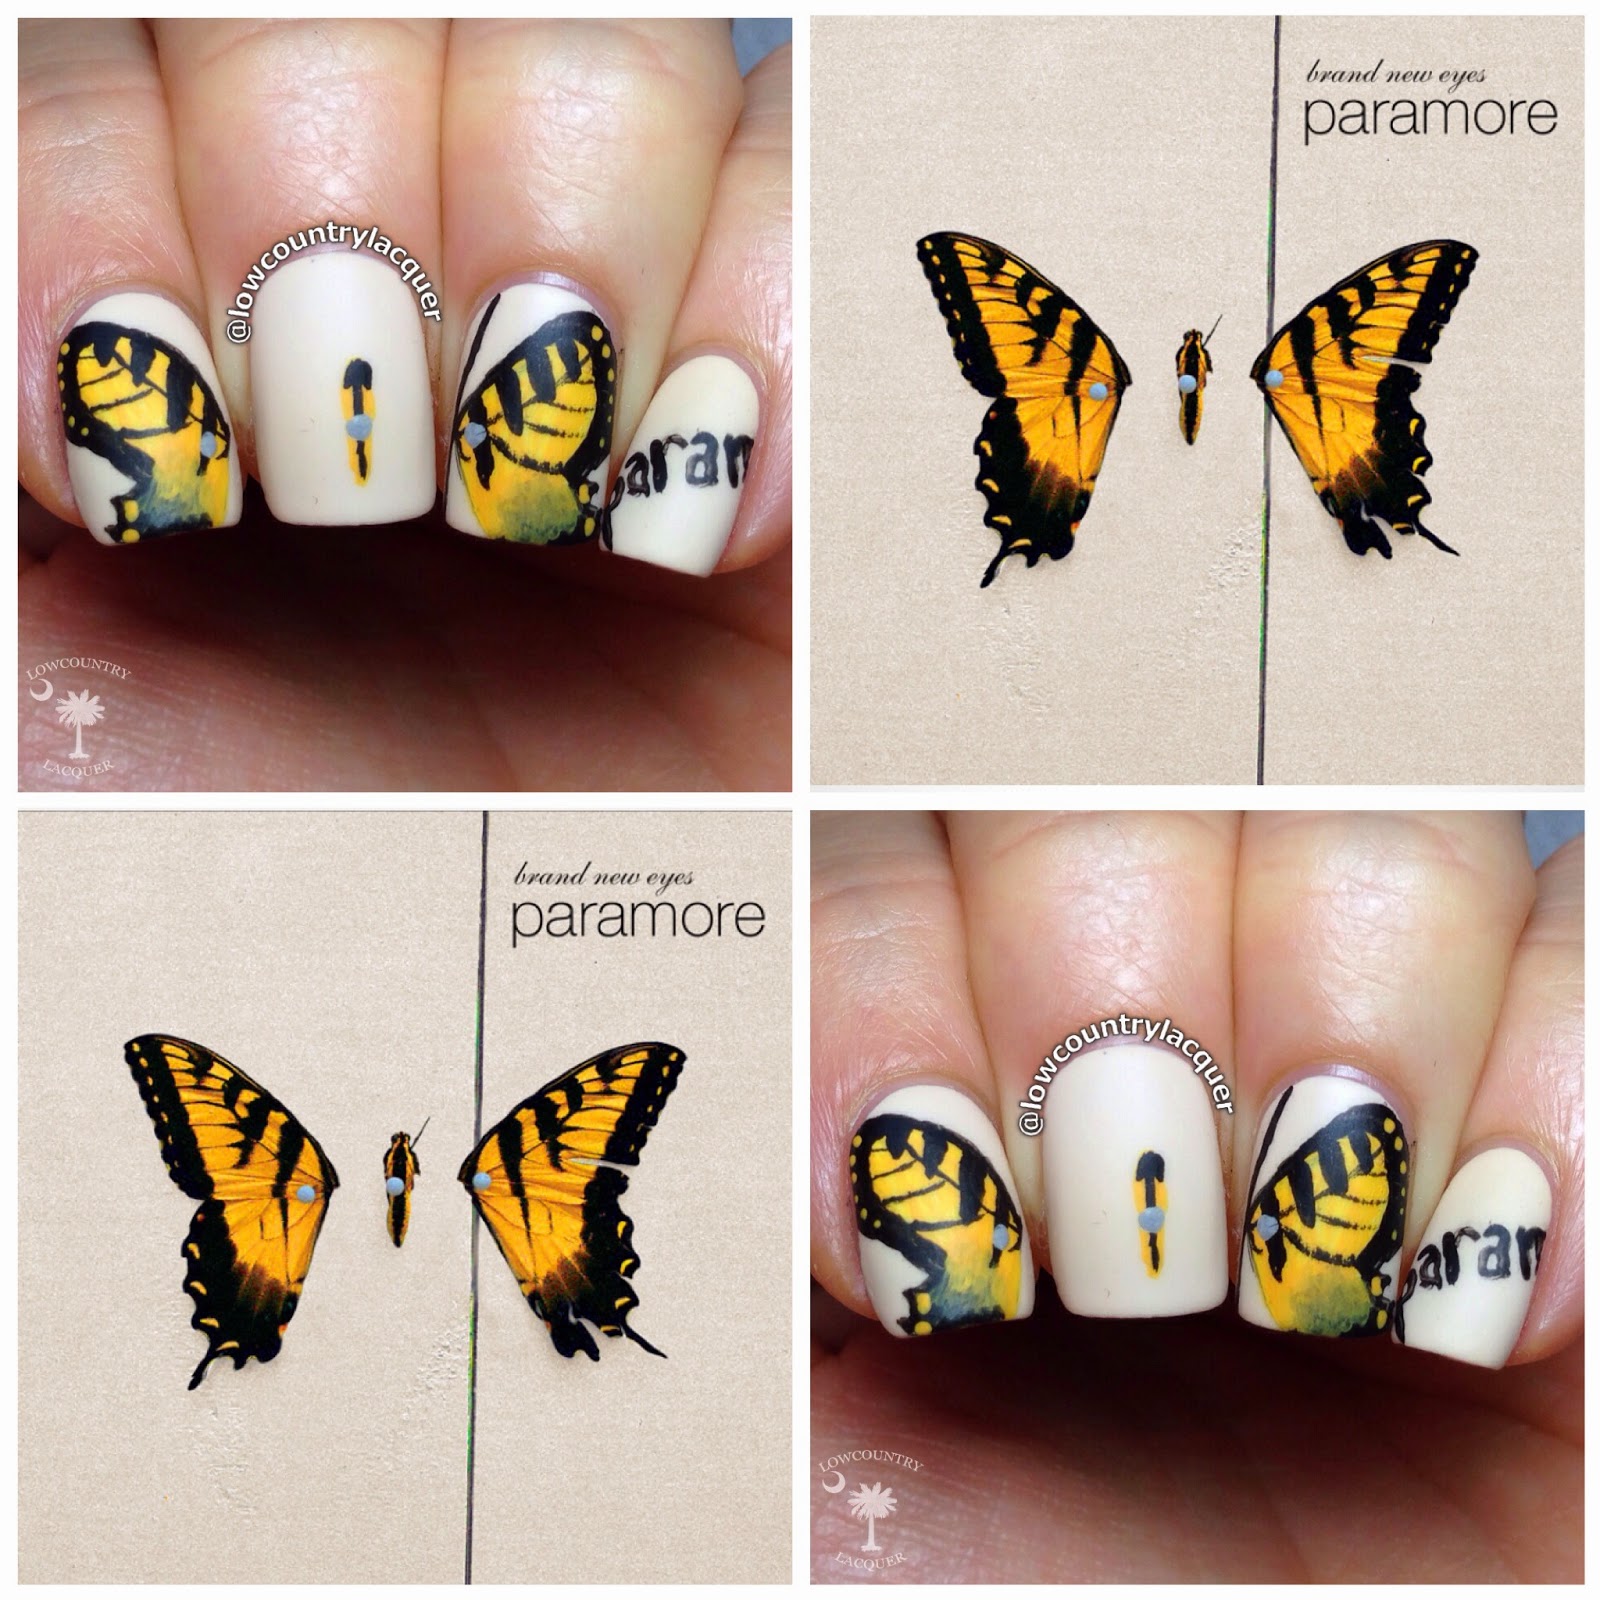 Lowcountry Lacquer: Music Monday: Paramore Brand New Eyes Album Art